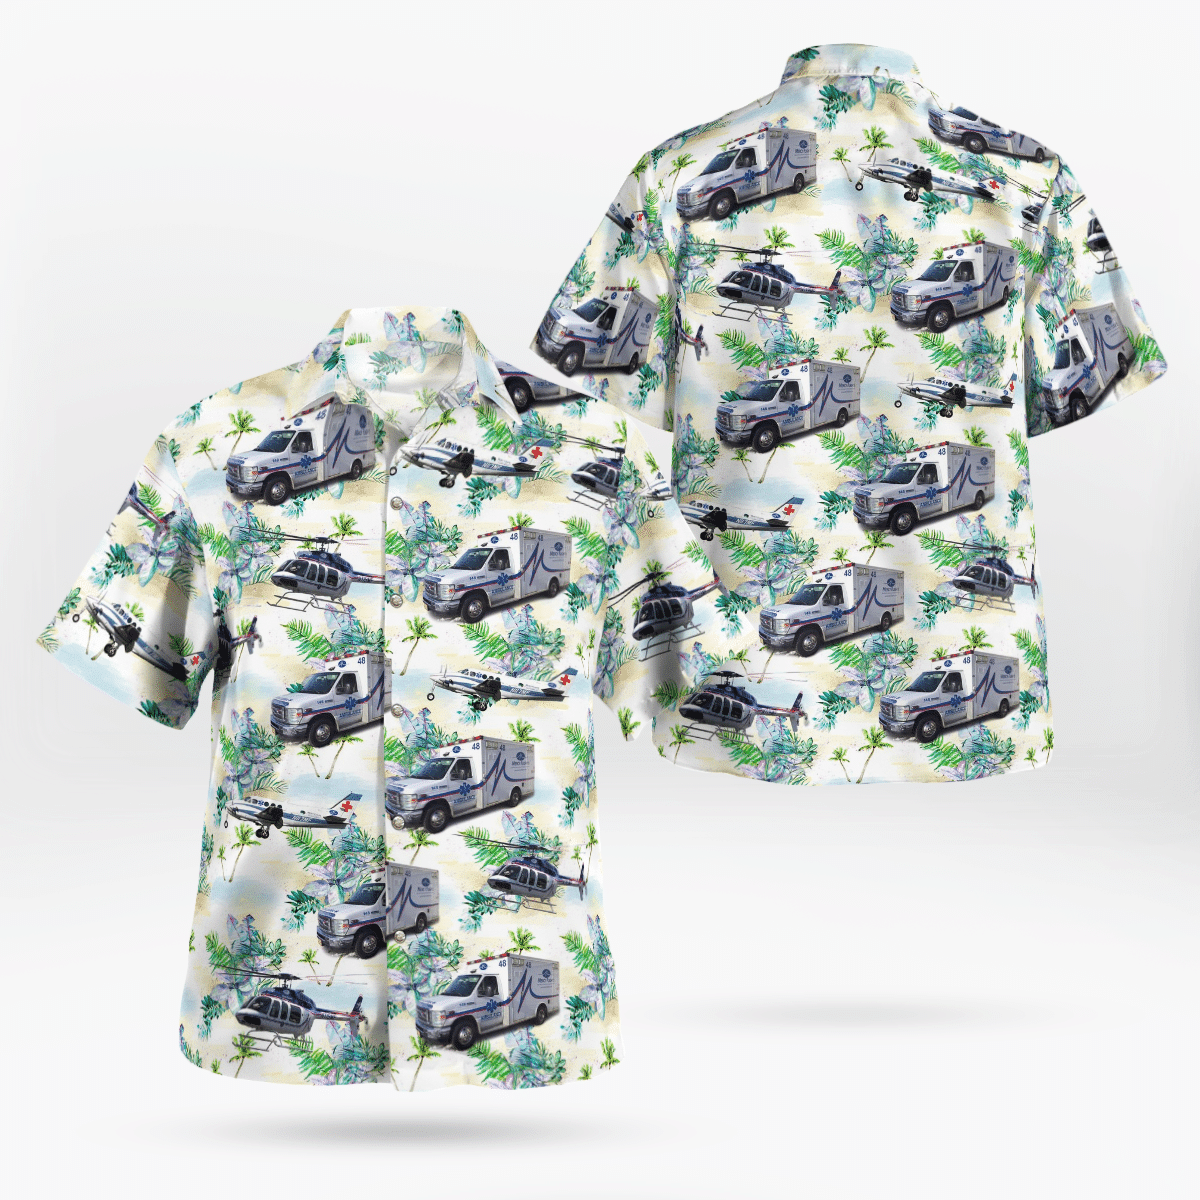 If you are in need of a new summertime look, pick up this Hawaiian shirt 148